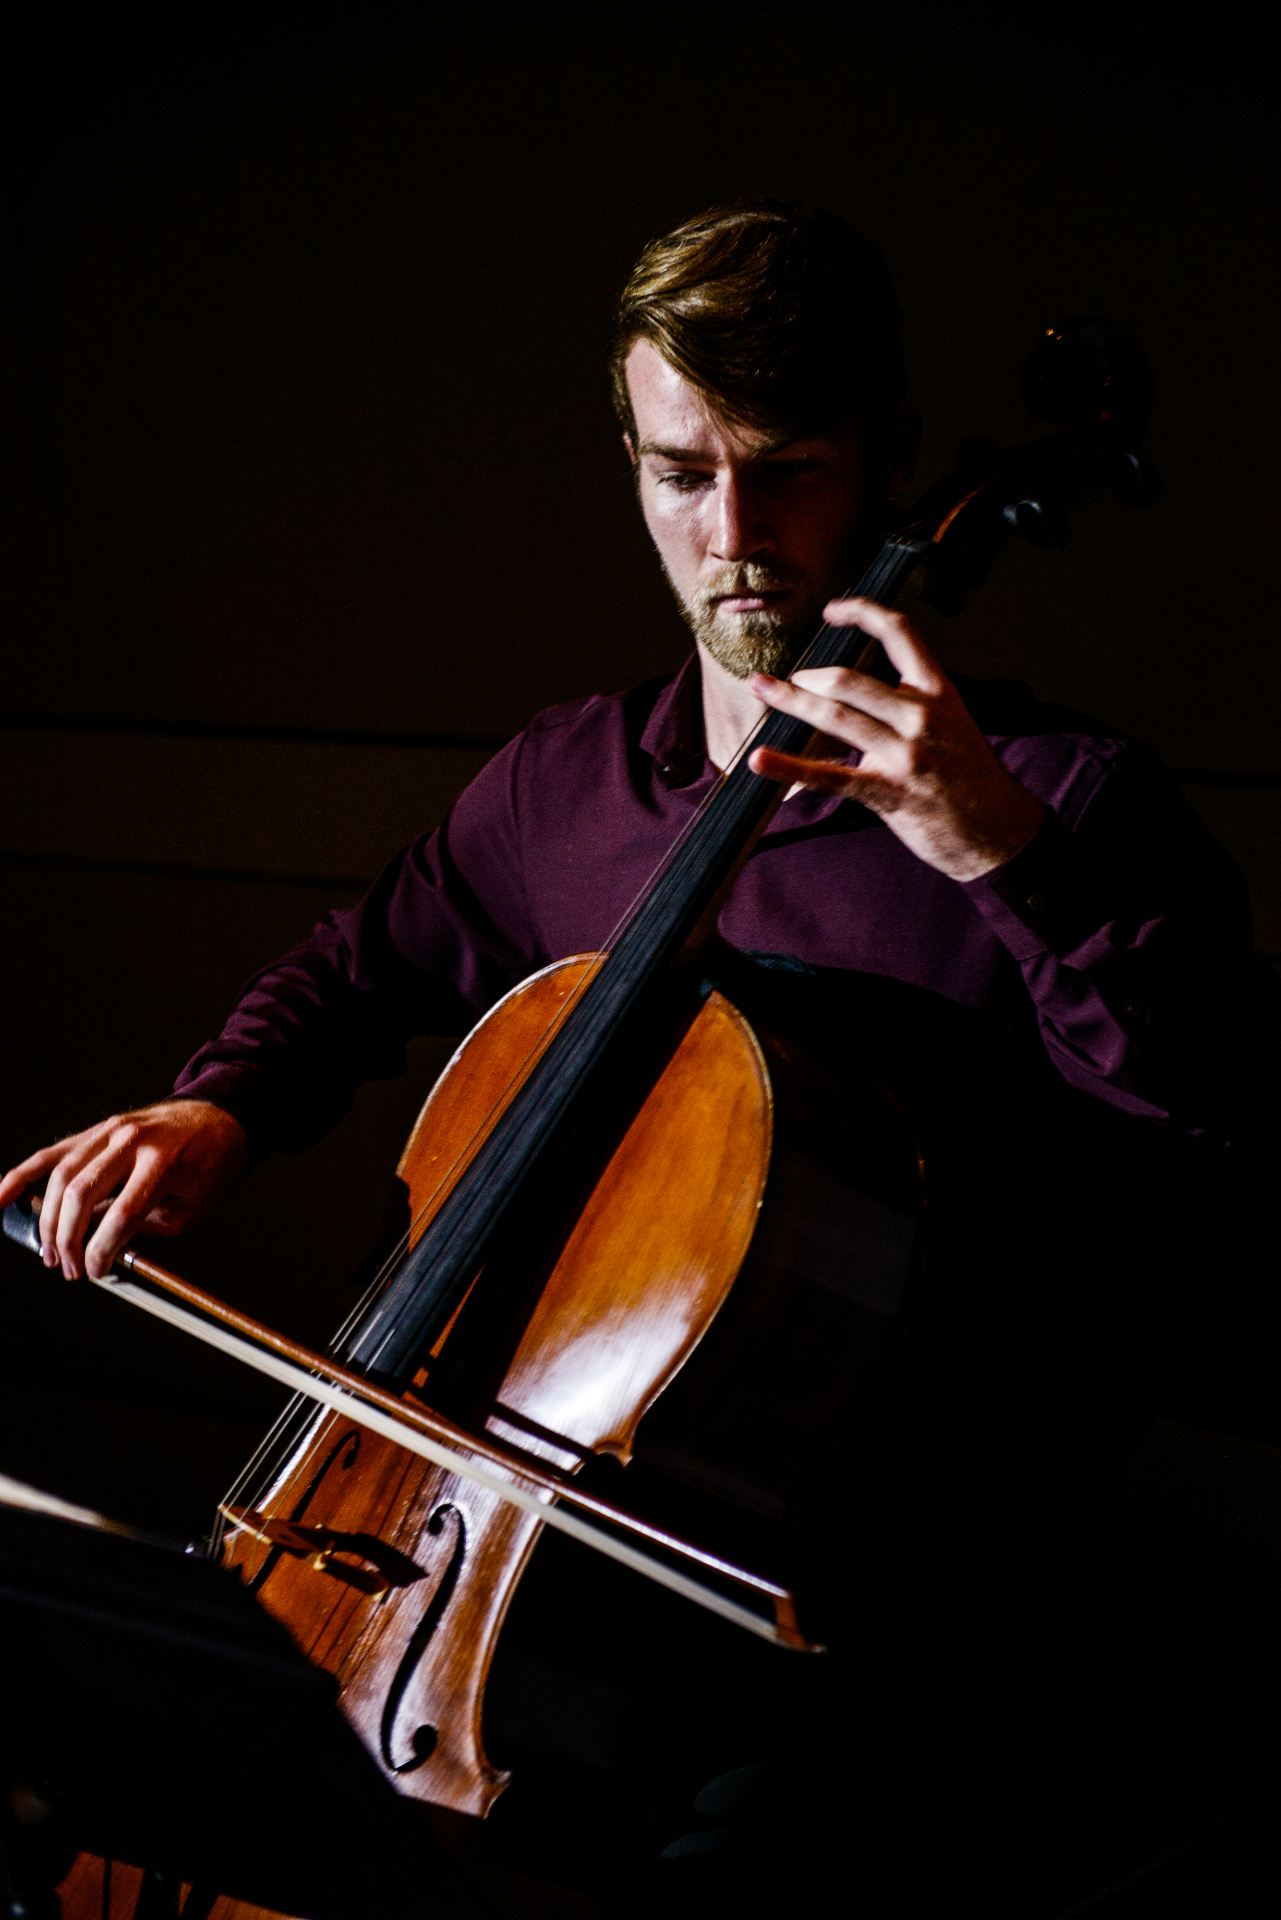 UT Dallas student Nate Mills performing on the cello.